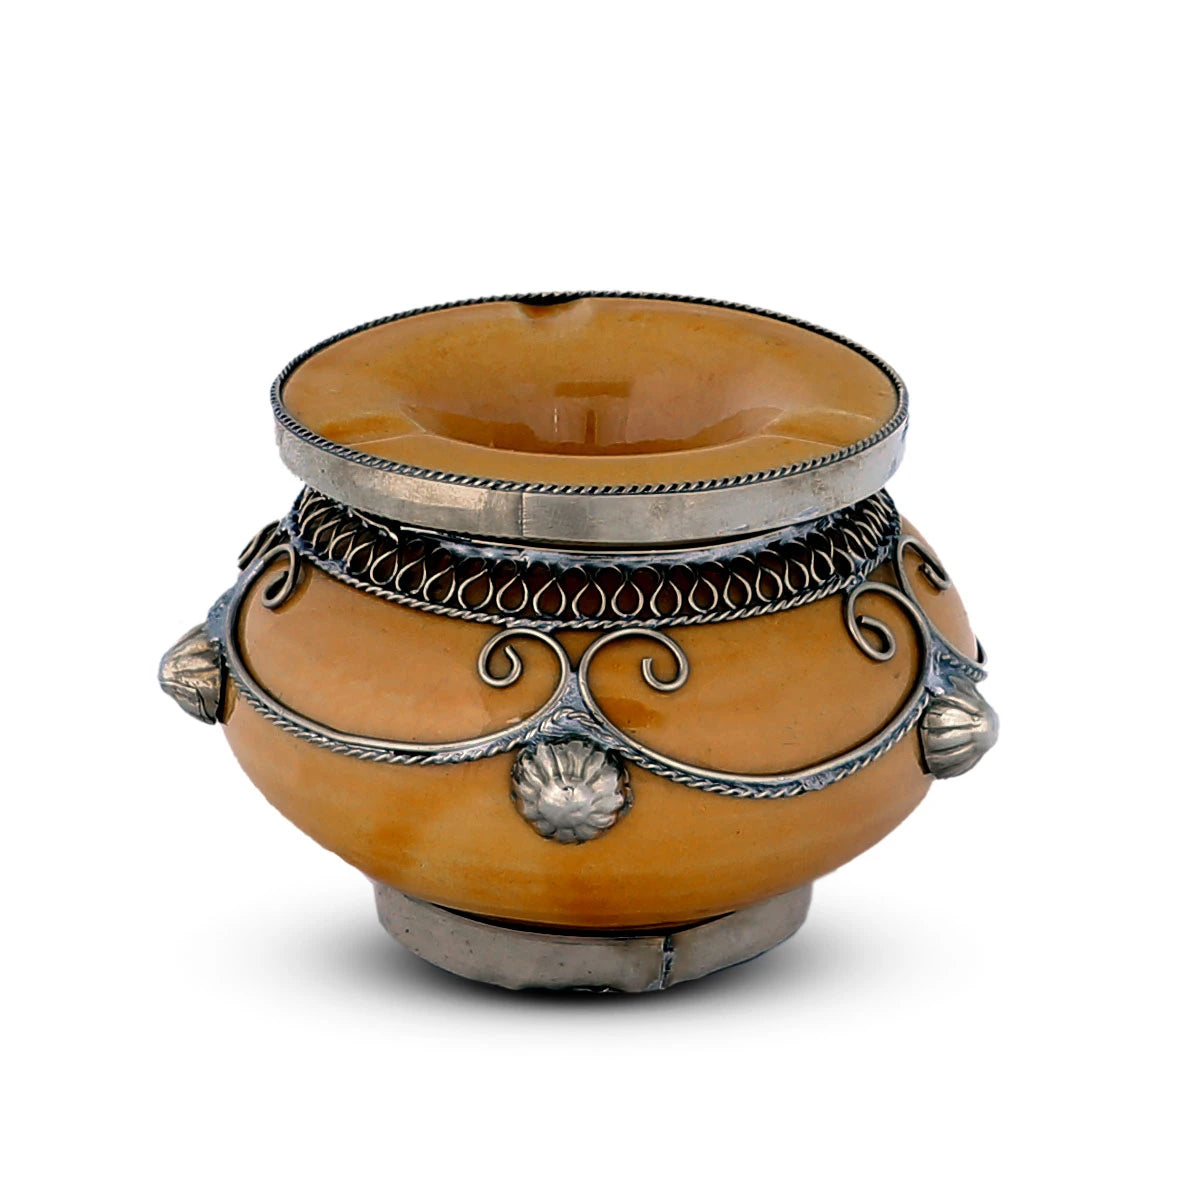 Front View of Three-Holder Moroccan Ashtray - Small, Orange